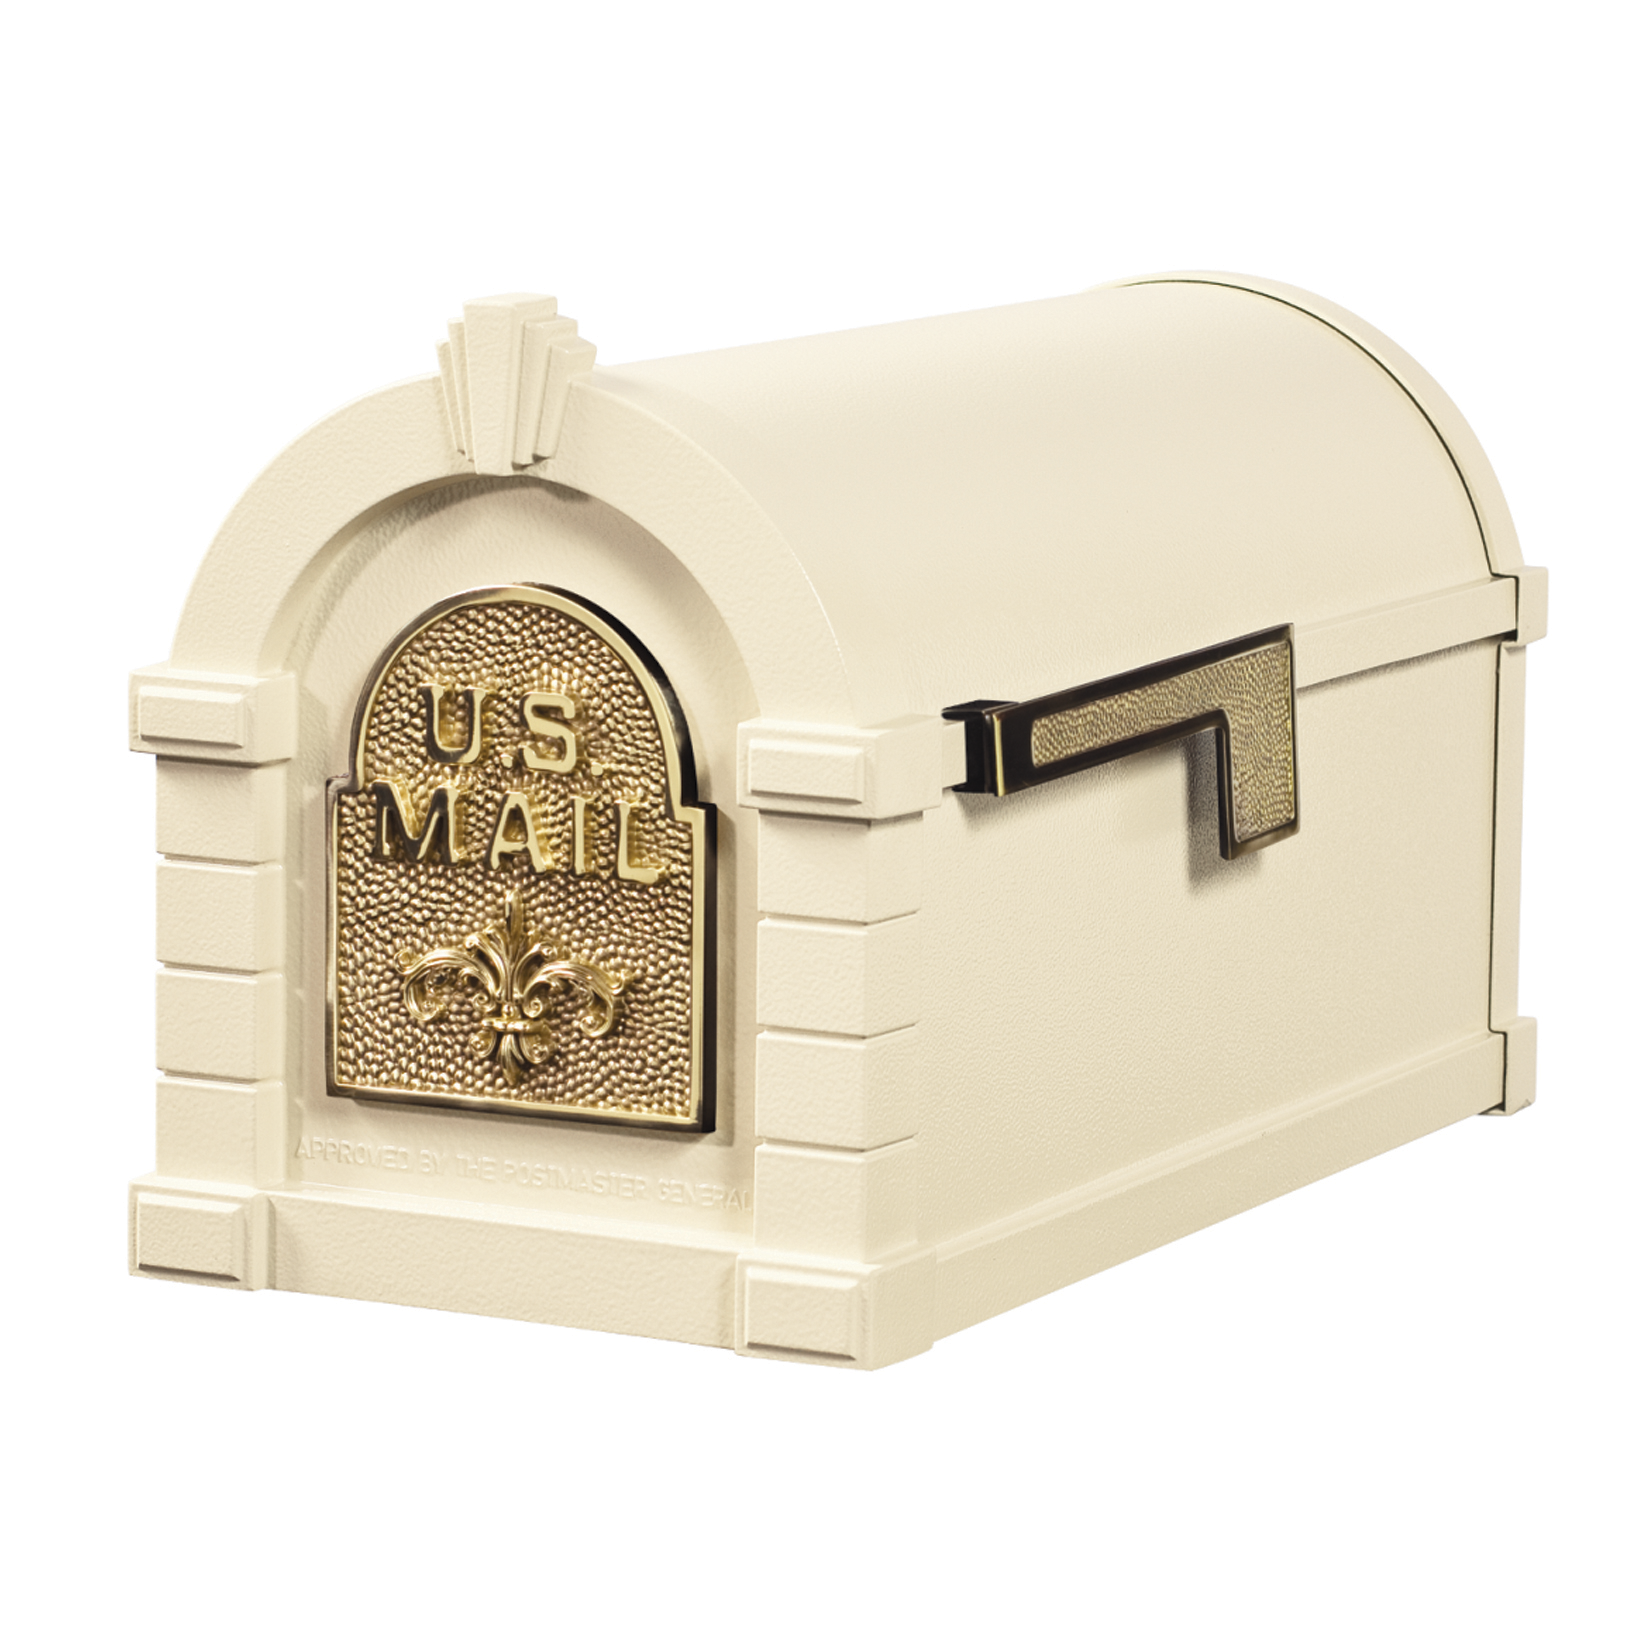 Gaines Fleur De Lis Keystone Mailboxes - Almond with Polished Brass